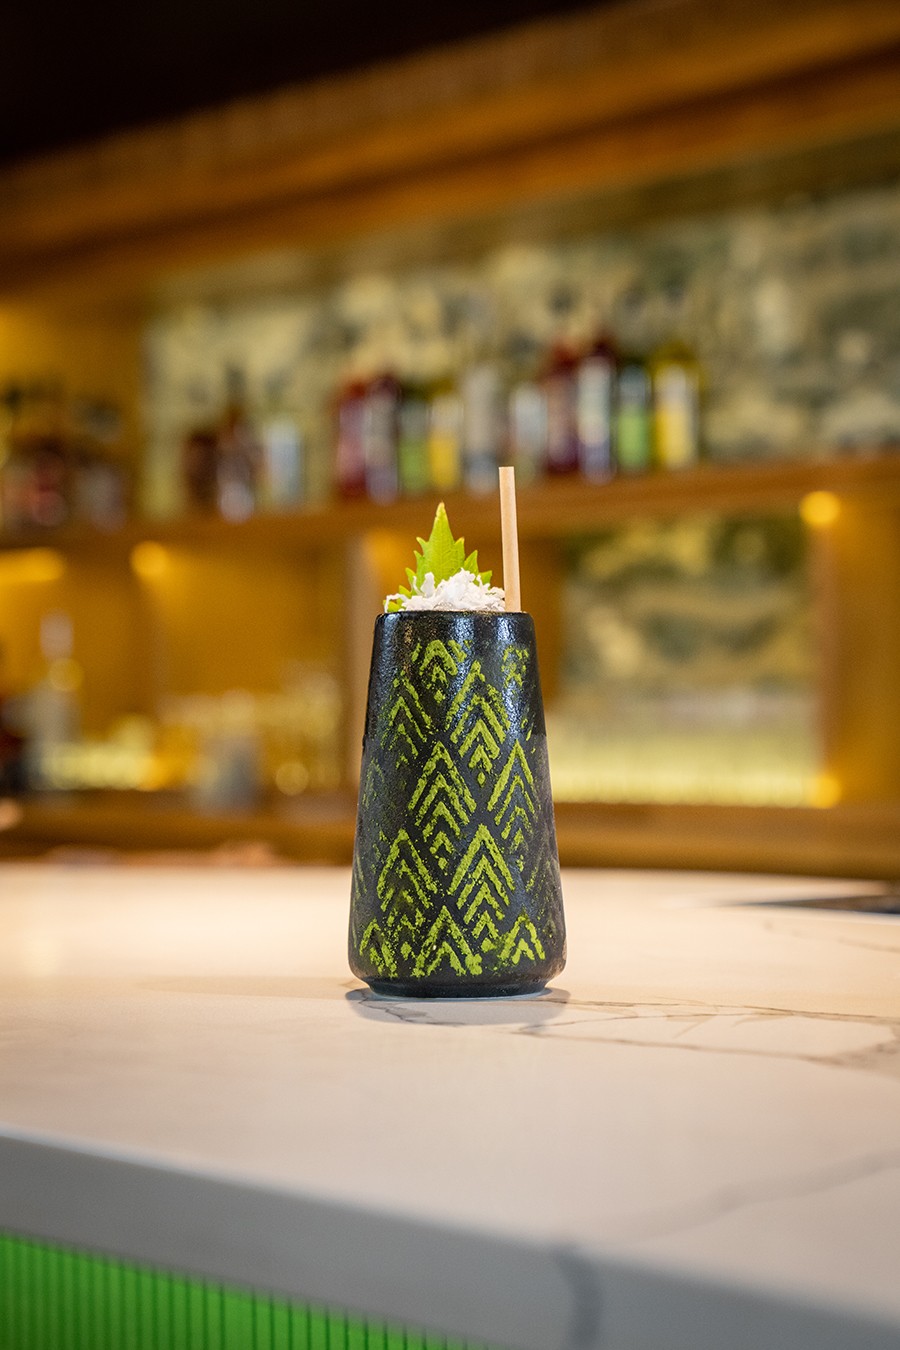 A tropical cocktail is served in a glass decorated with green arrow-like shapes.